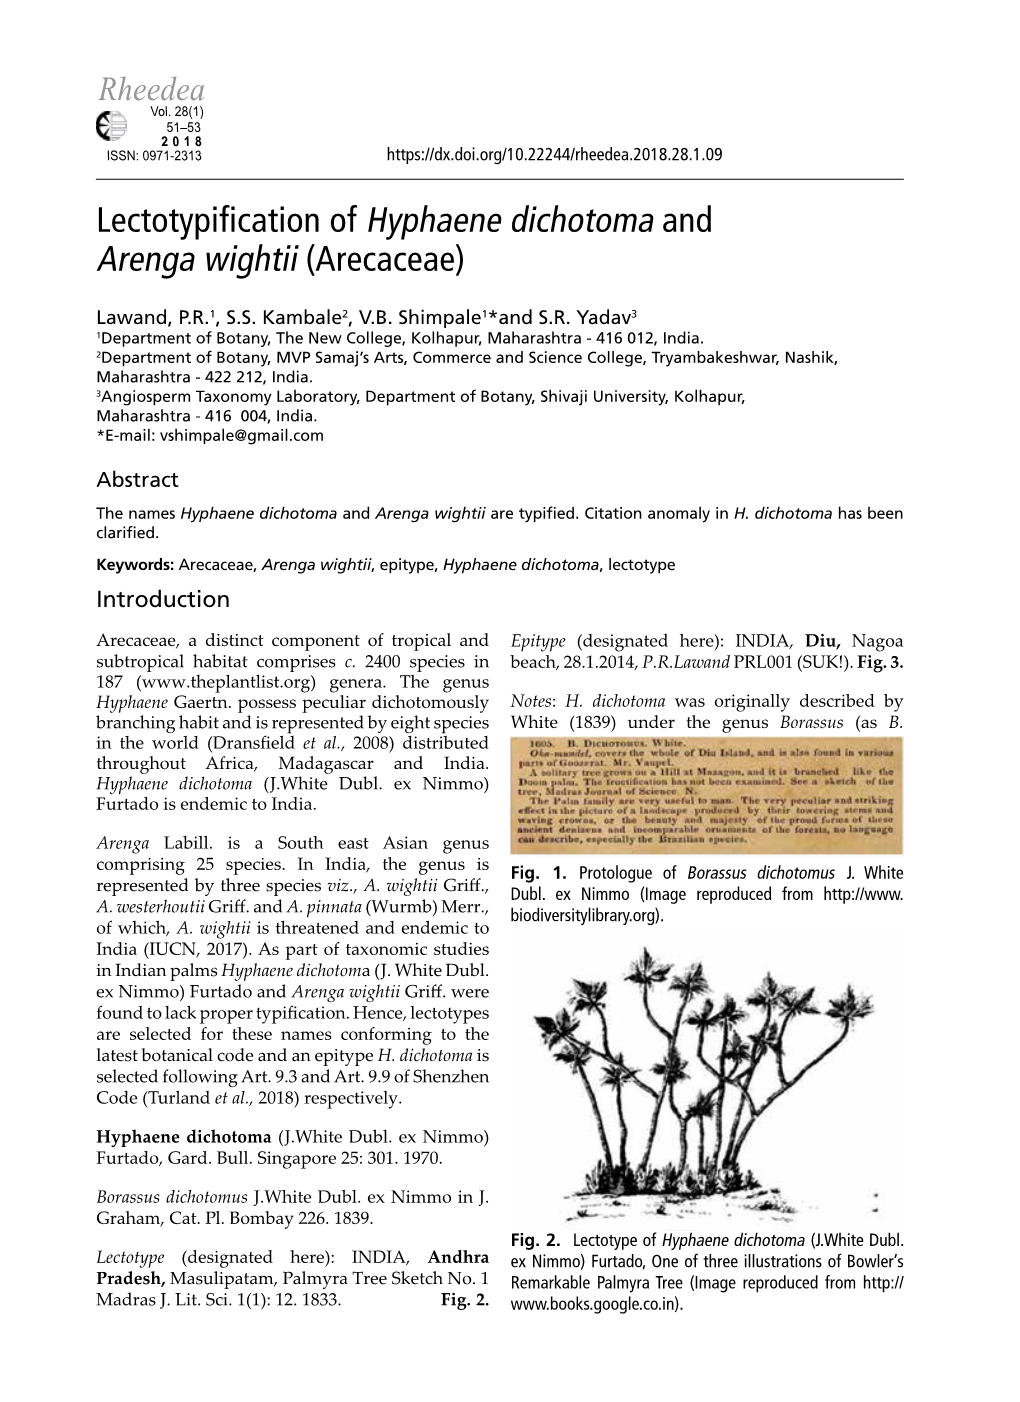 Lectotypification of Hyphaene Dichotoma and Arenga Wightii (Arecaceae)